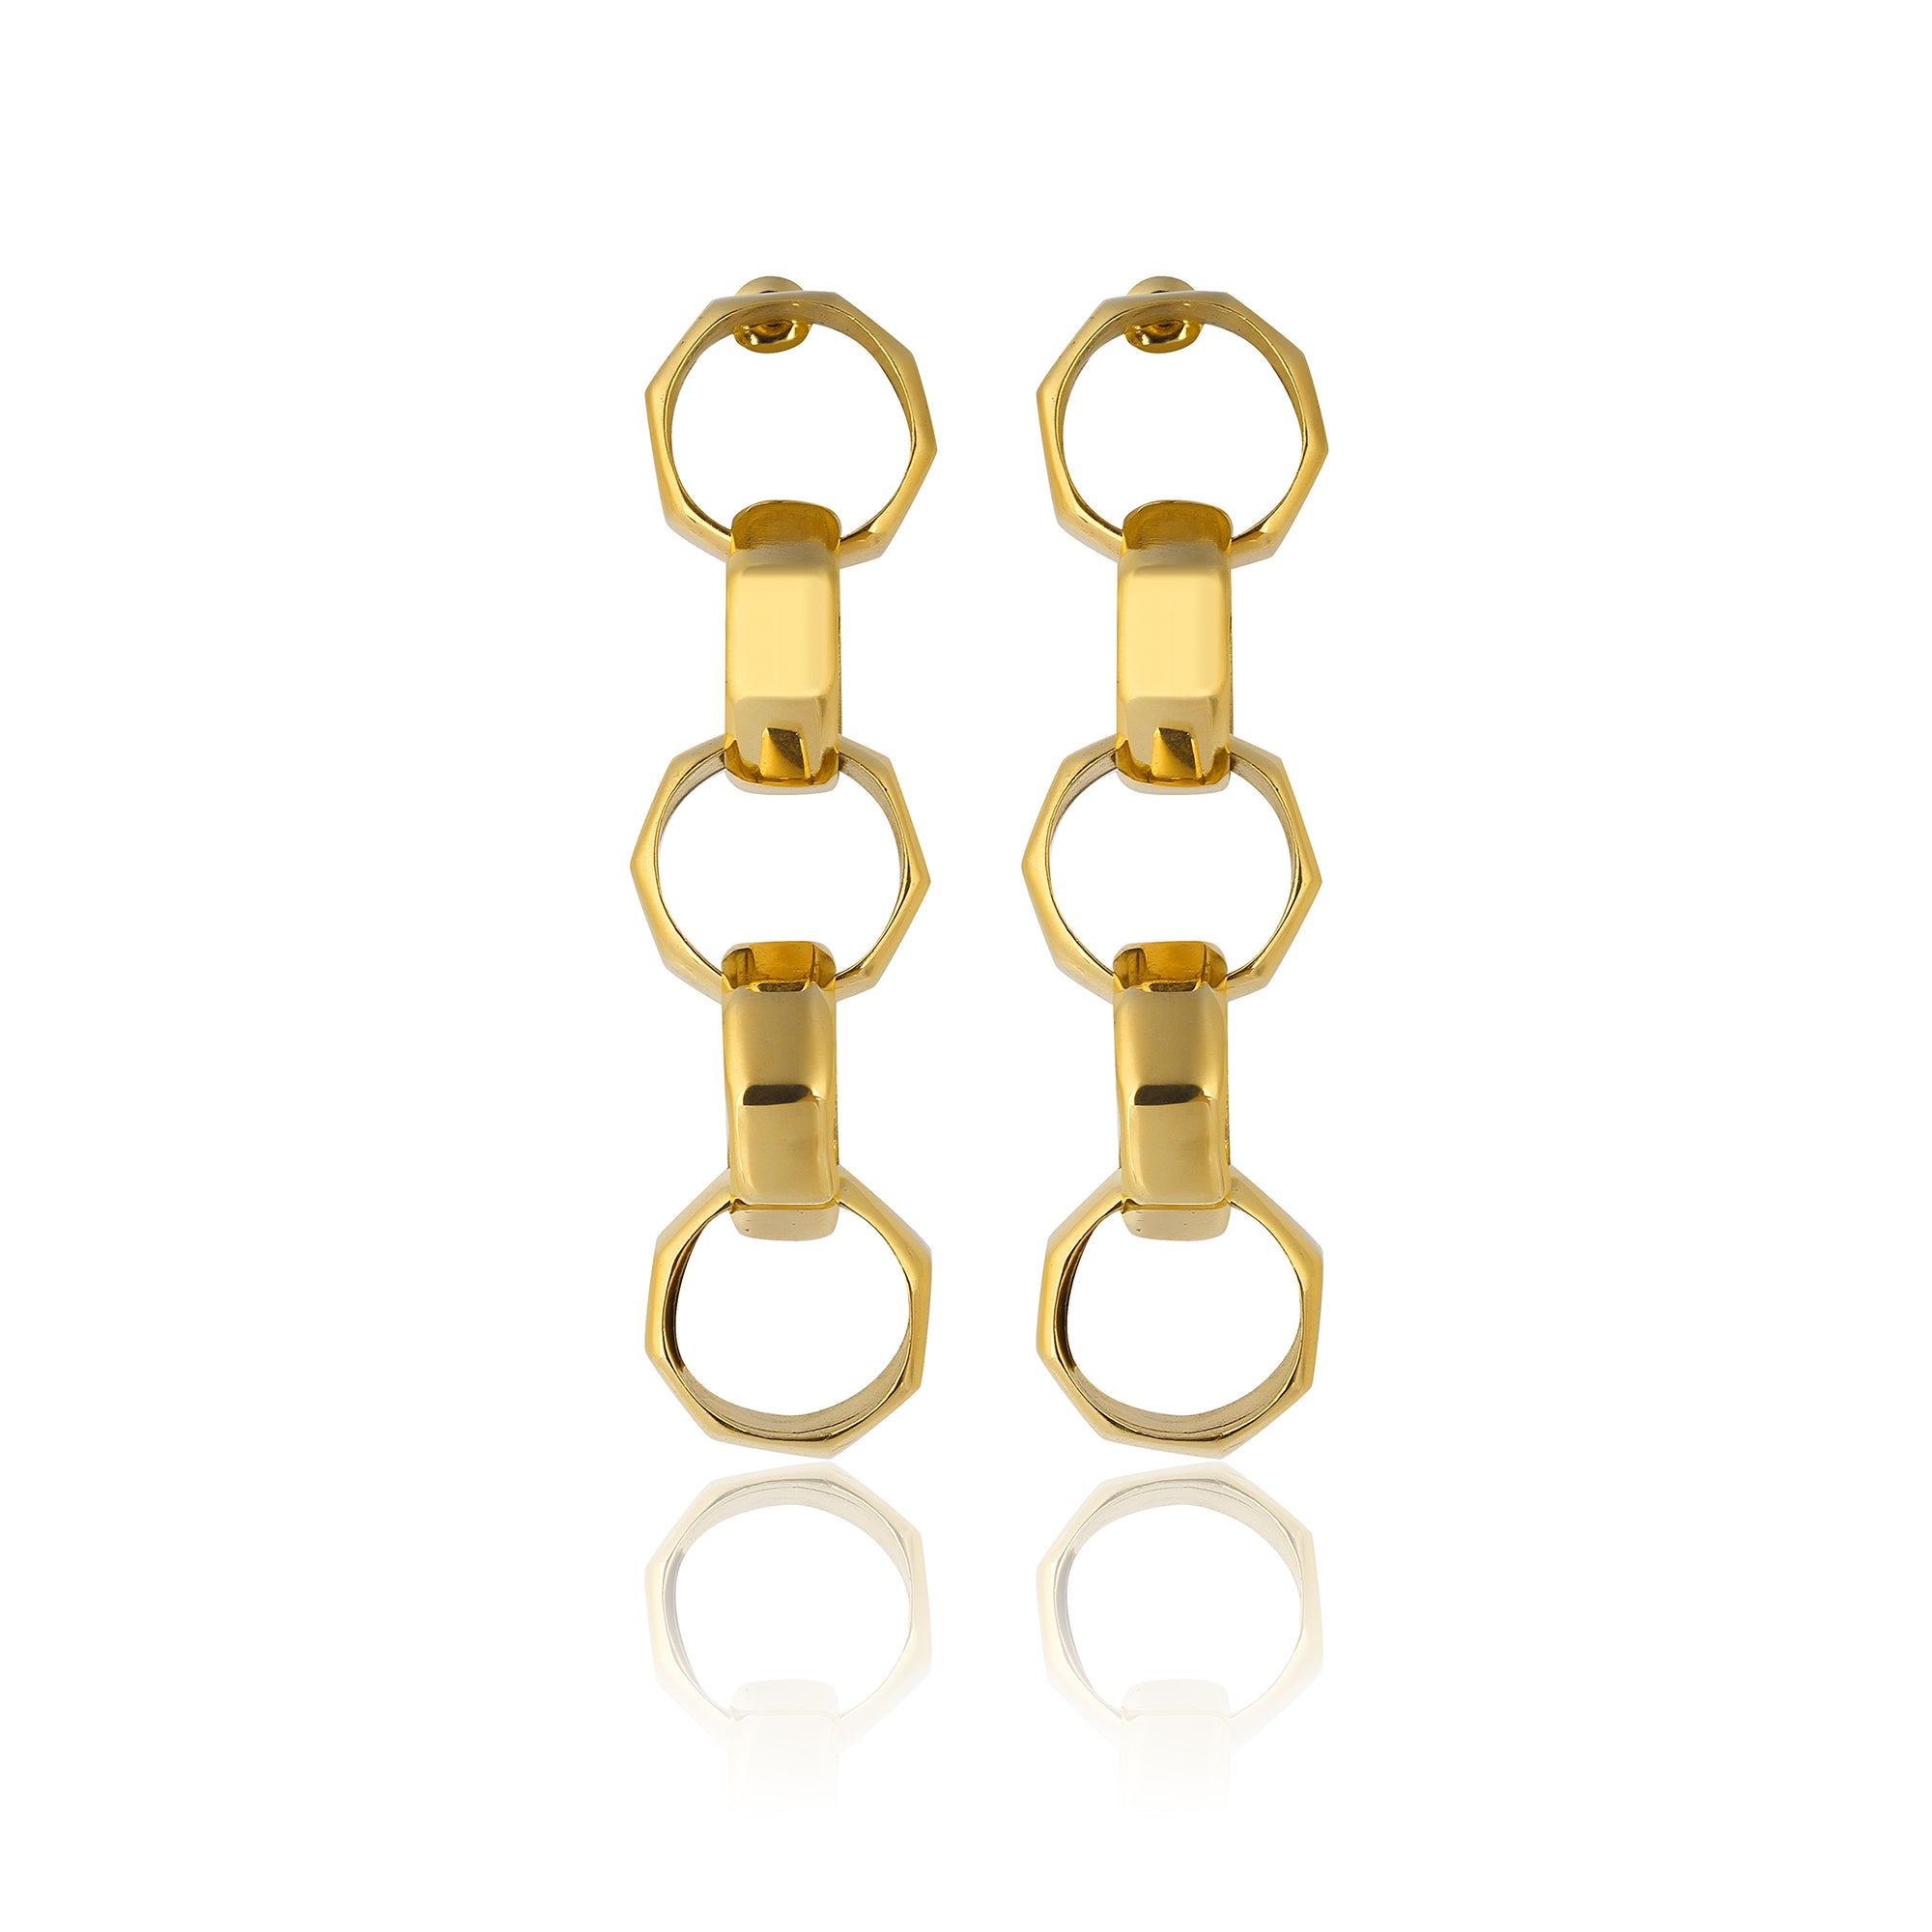 24K gold plated chain earrings statement jewelry